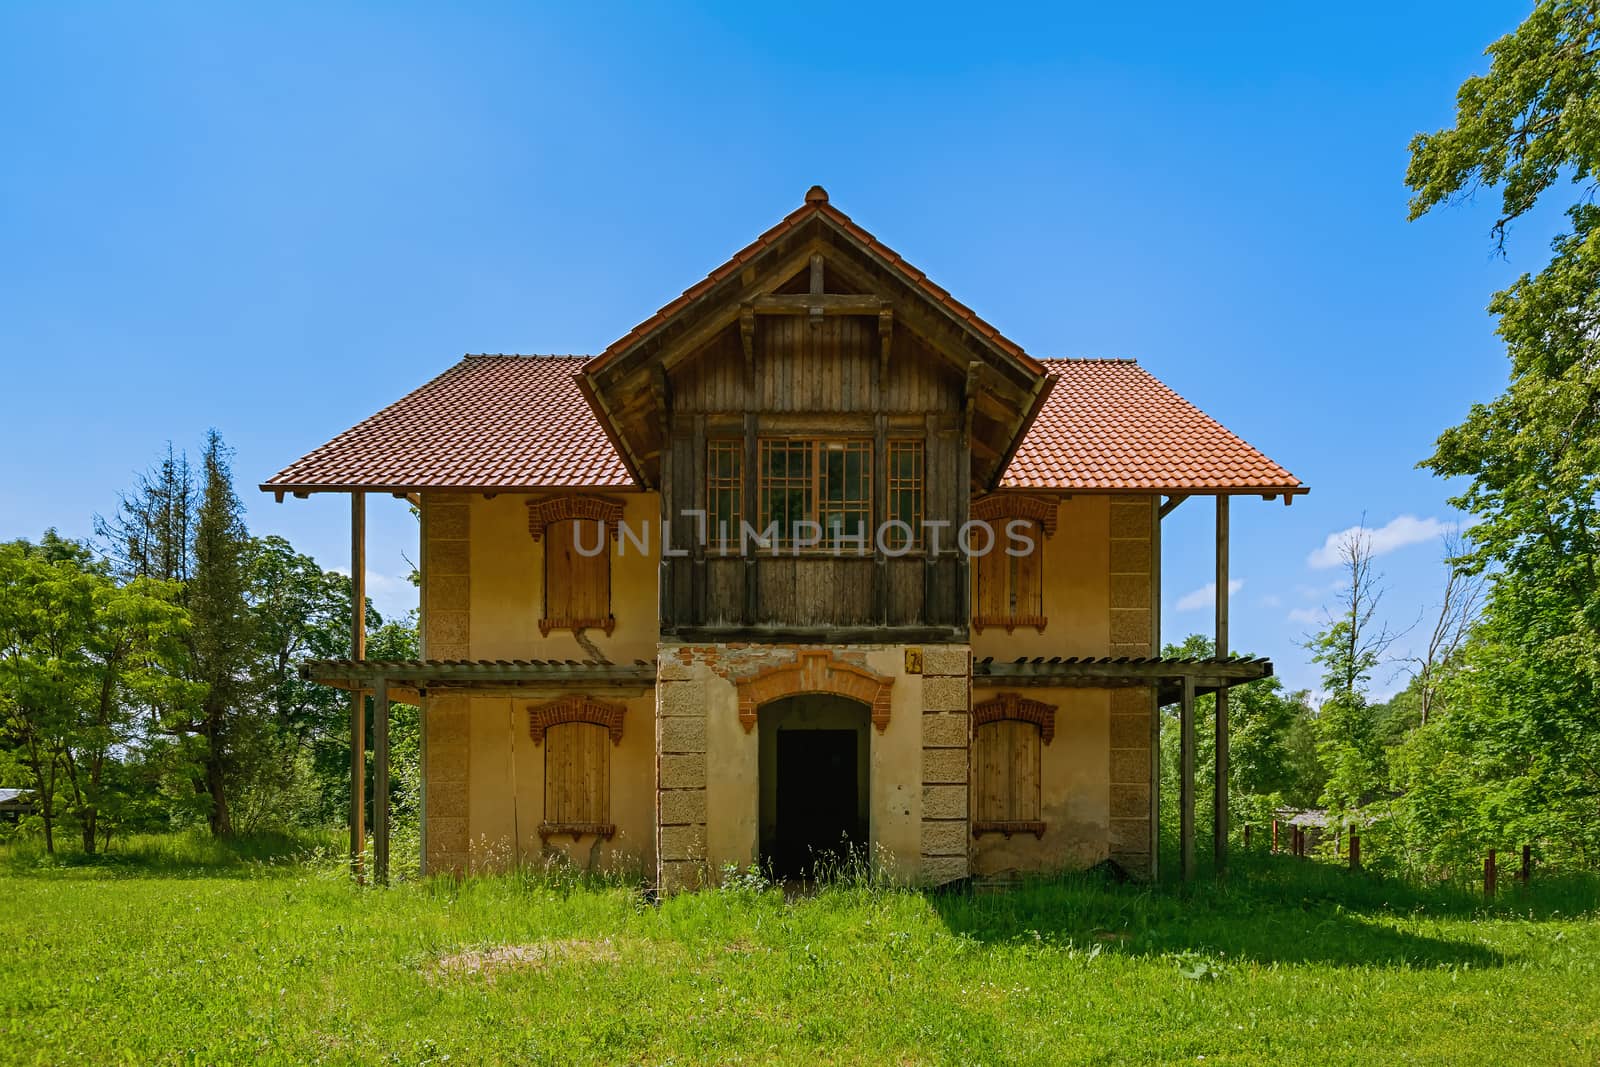 Abandoned old house in the countryside